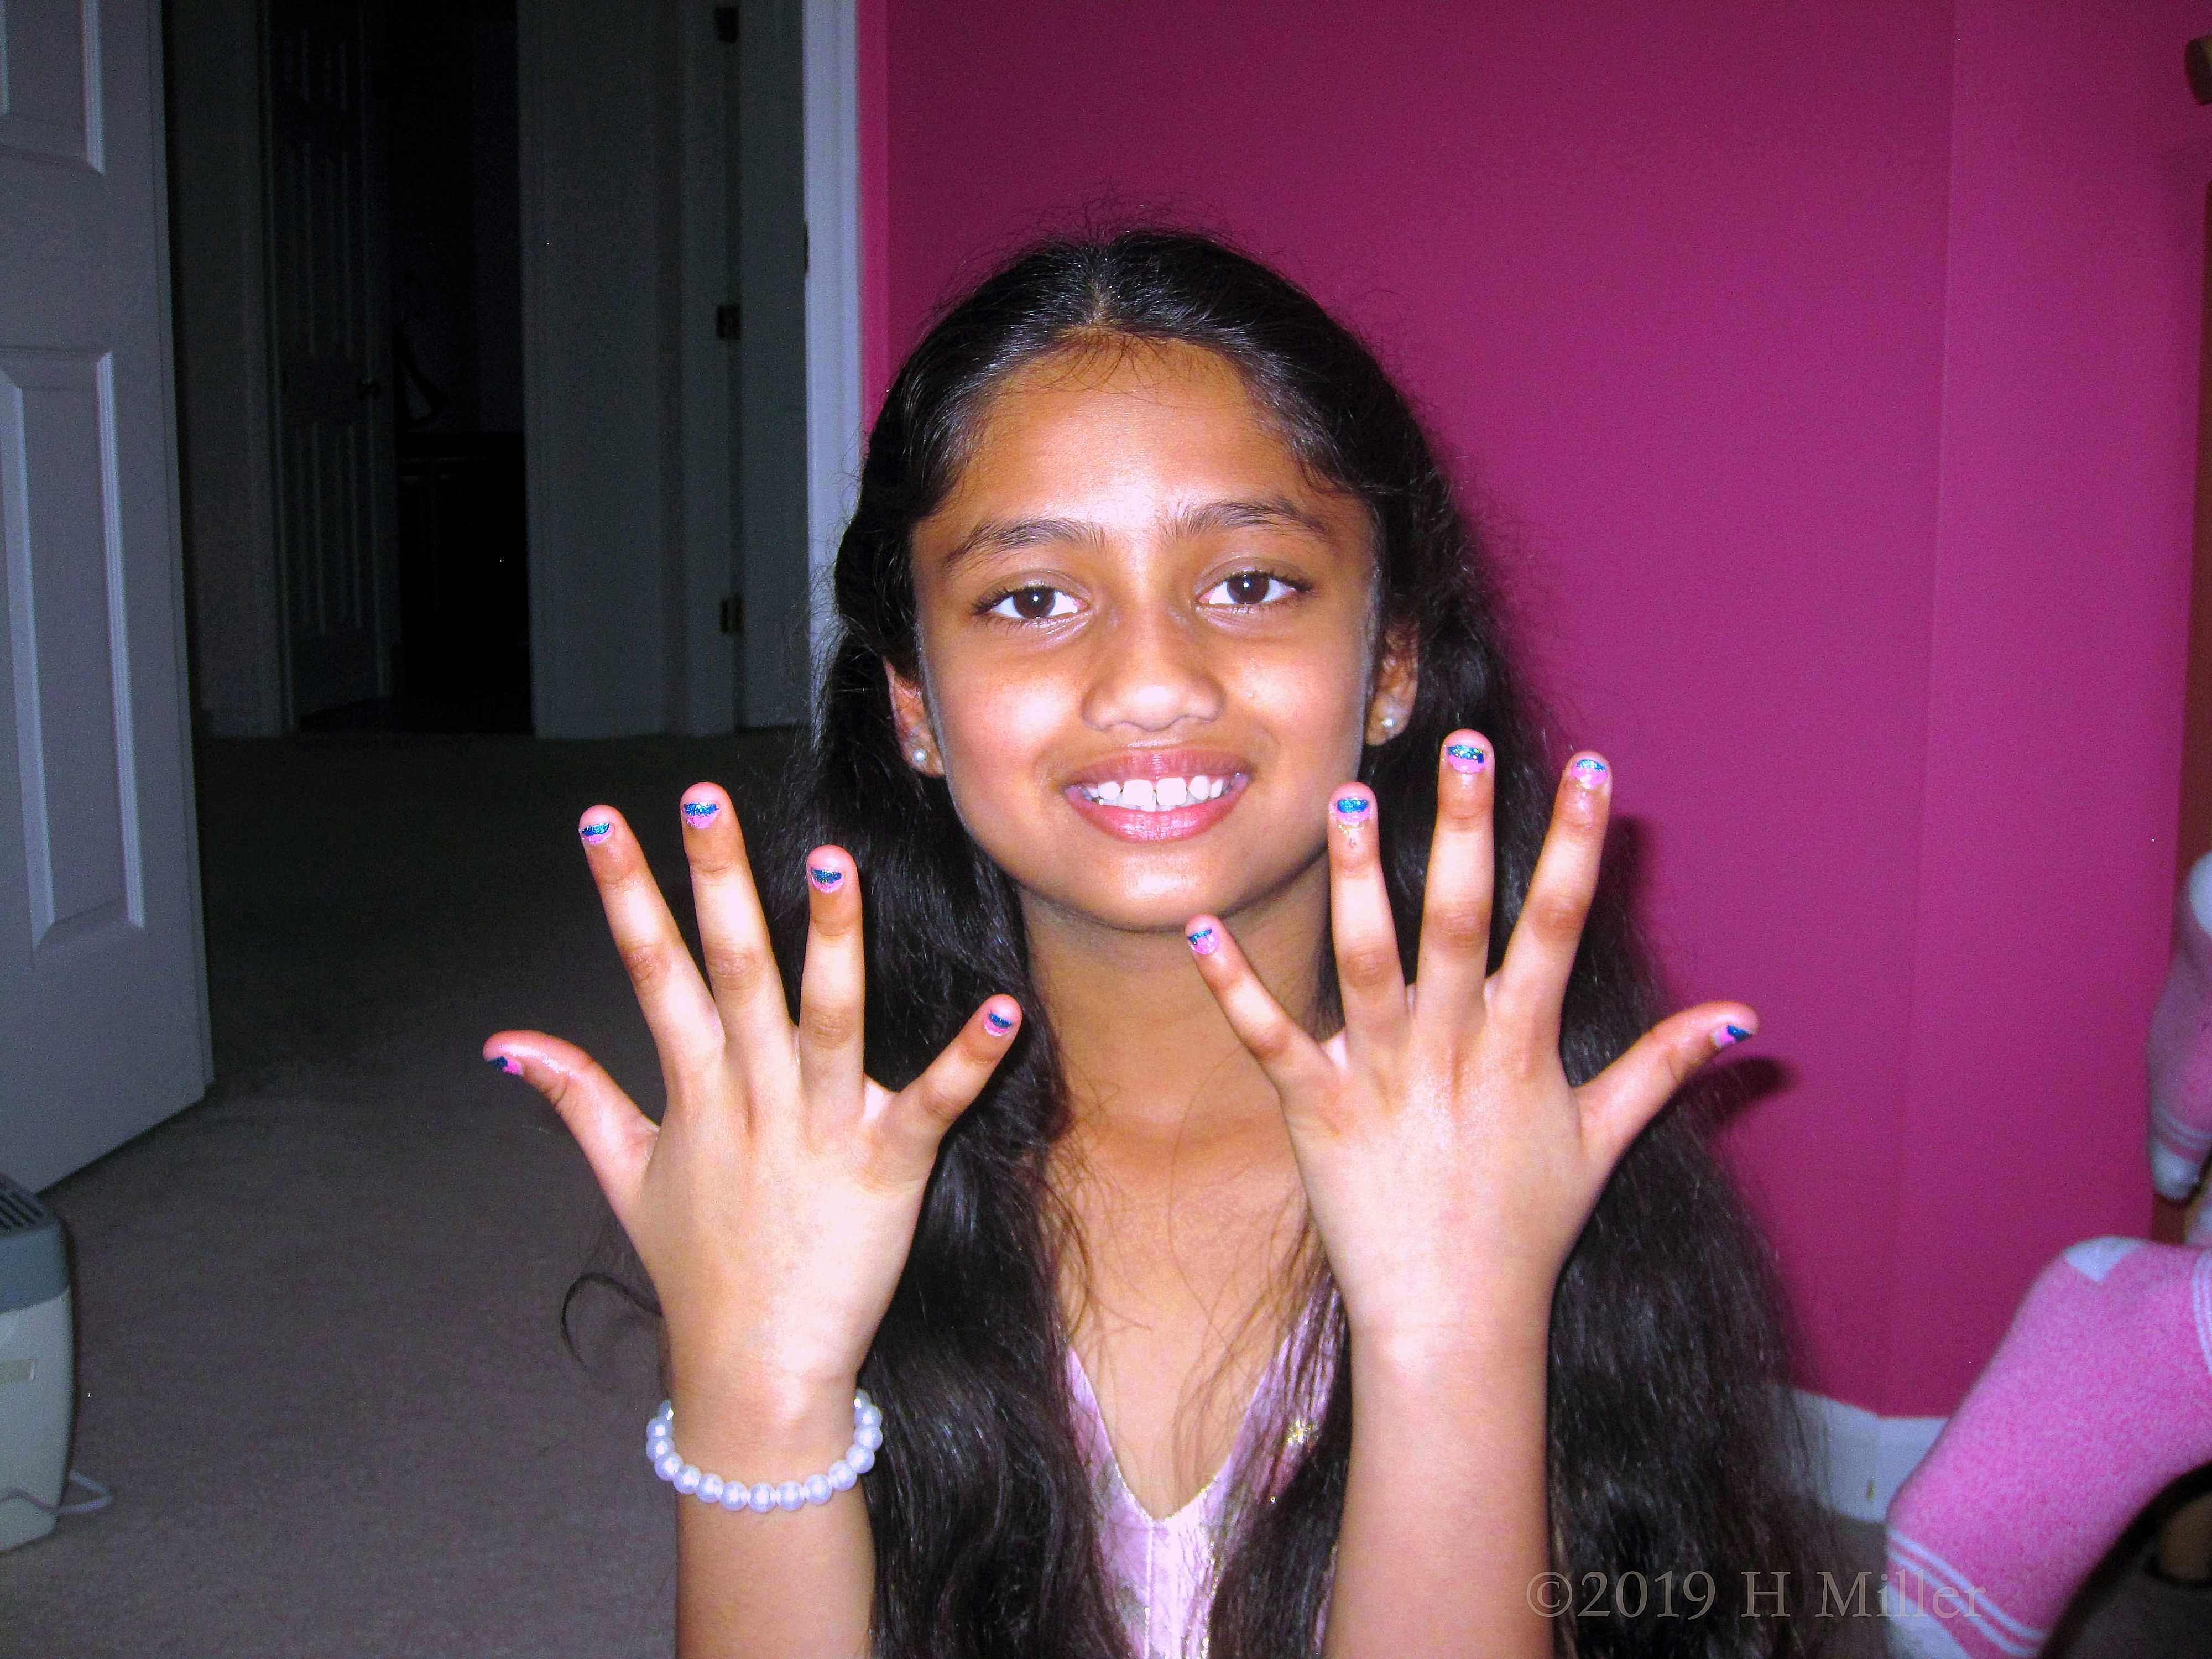 Showing Her New Ombre Kids Nail Art With A Smile 